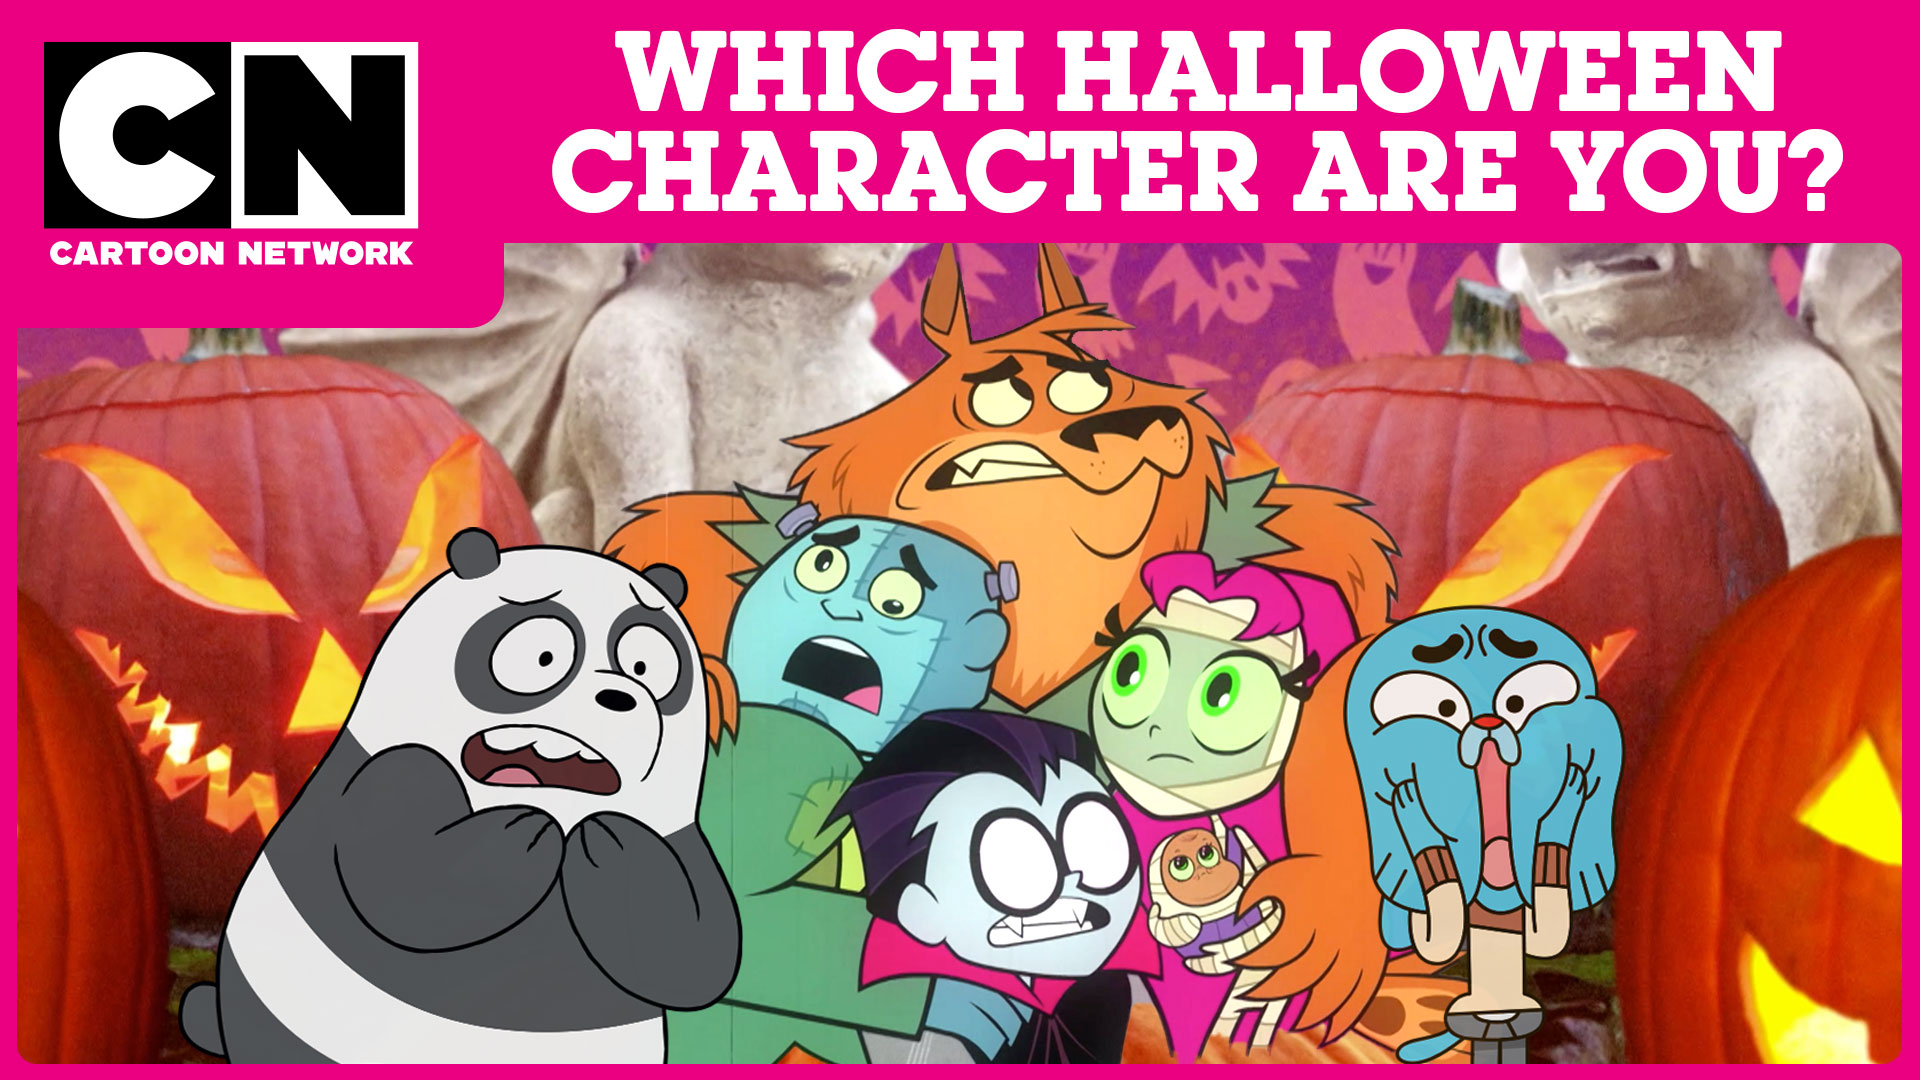 QUIZ: Which Cartoon Network Halloween Character Are You?